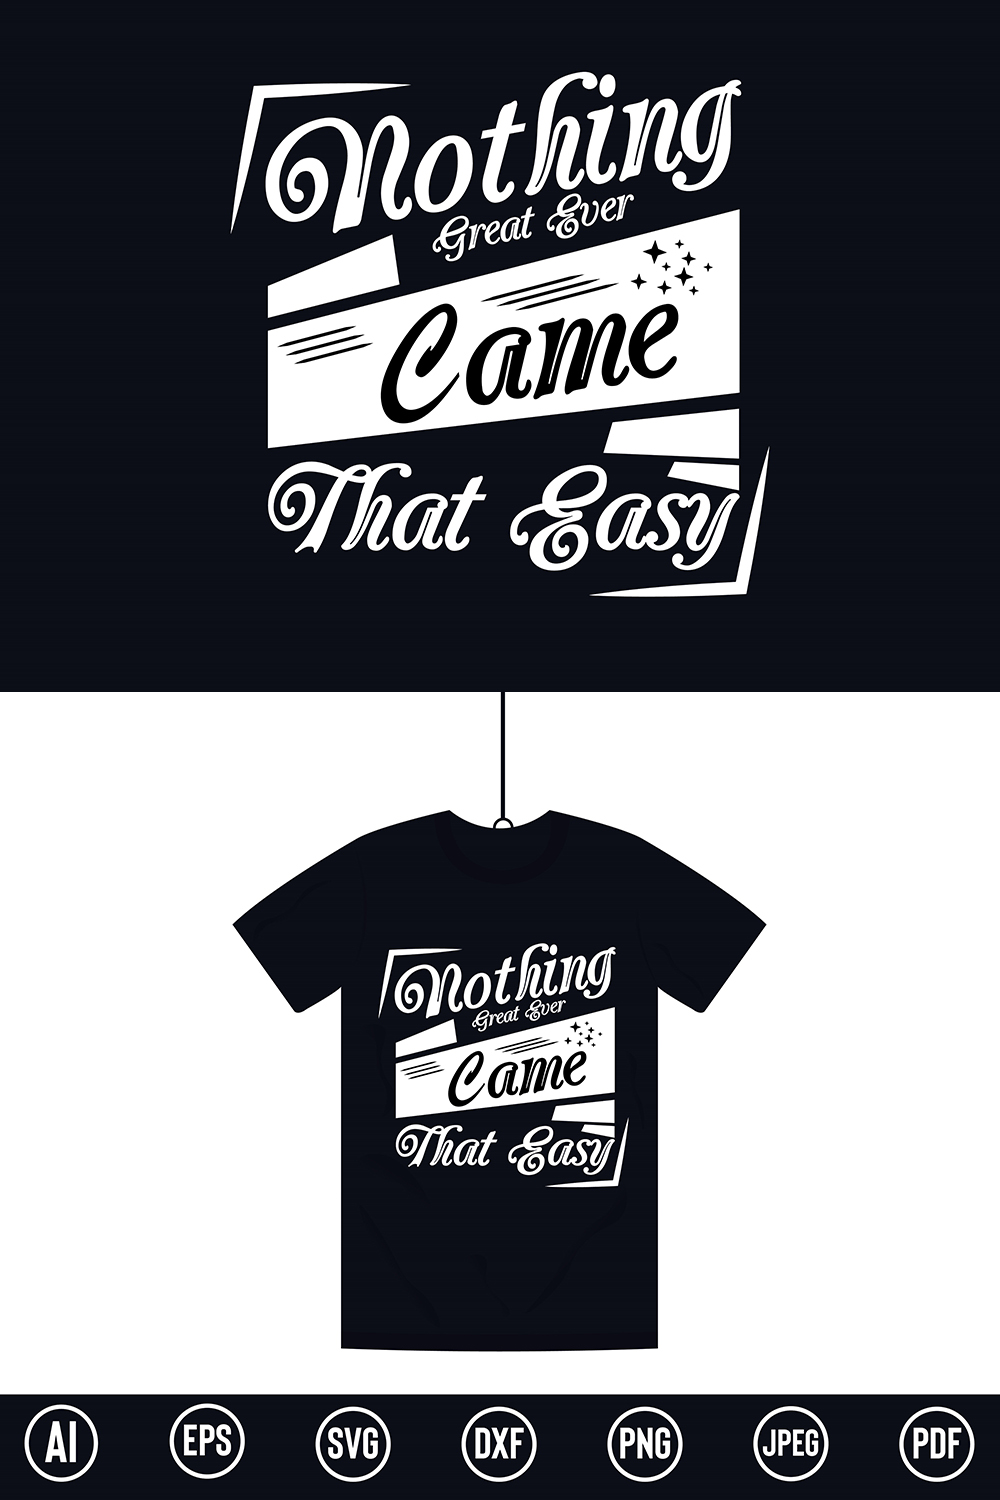 Modern Typography T-Shirt design with “Nothing great ever came that easy” quote for t-shirt, posters, stickers, mug prints, banners, gift cards, labels etc pinterest preview image.